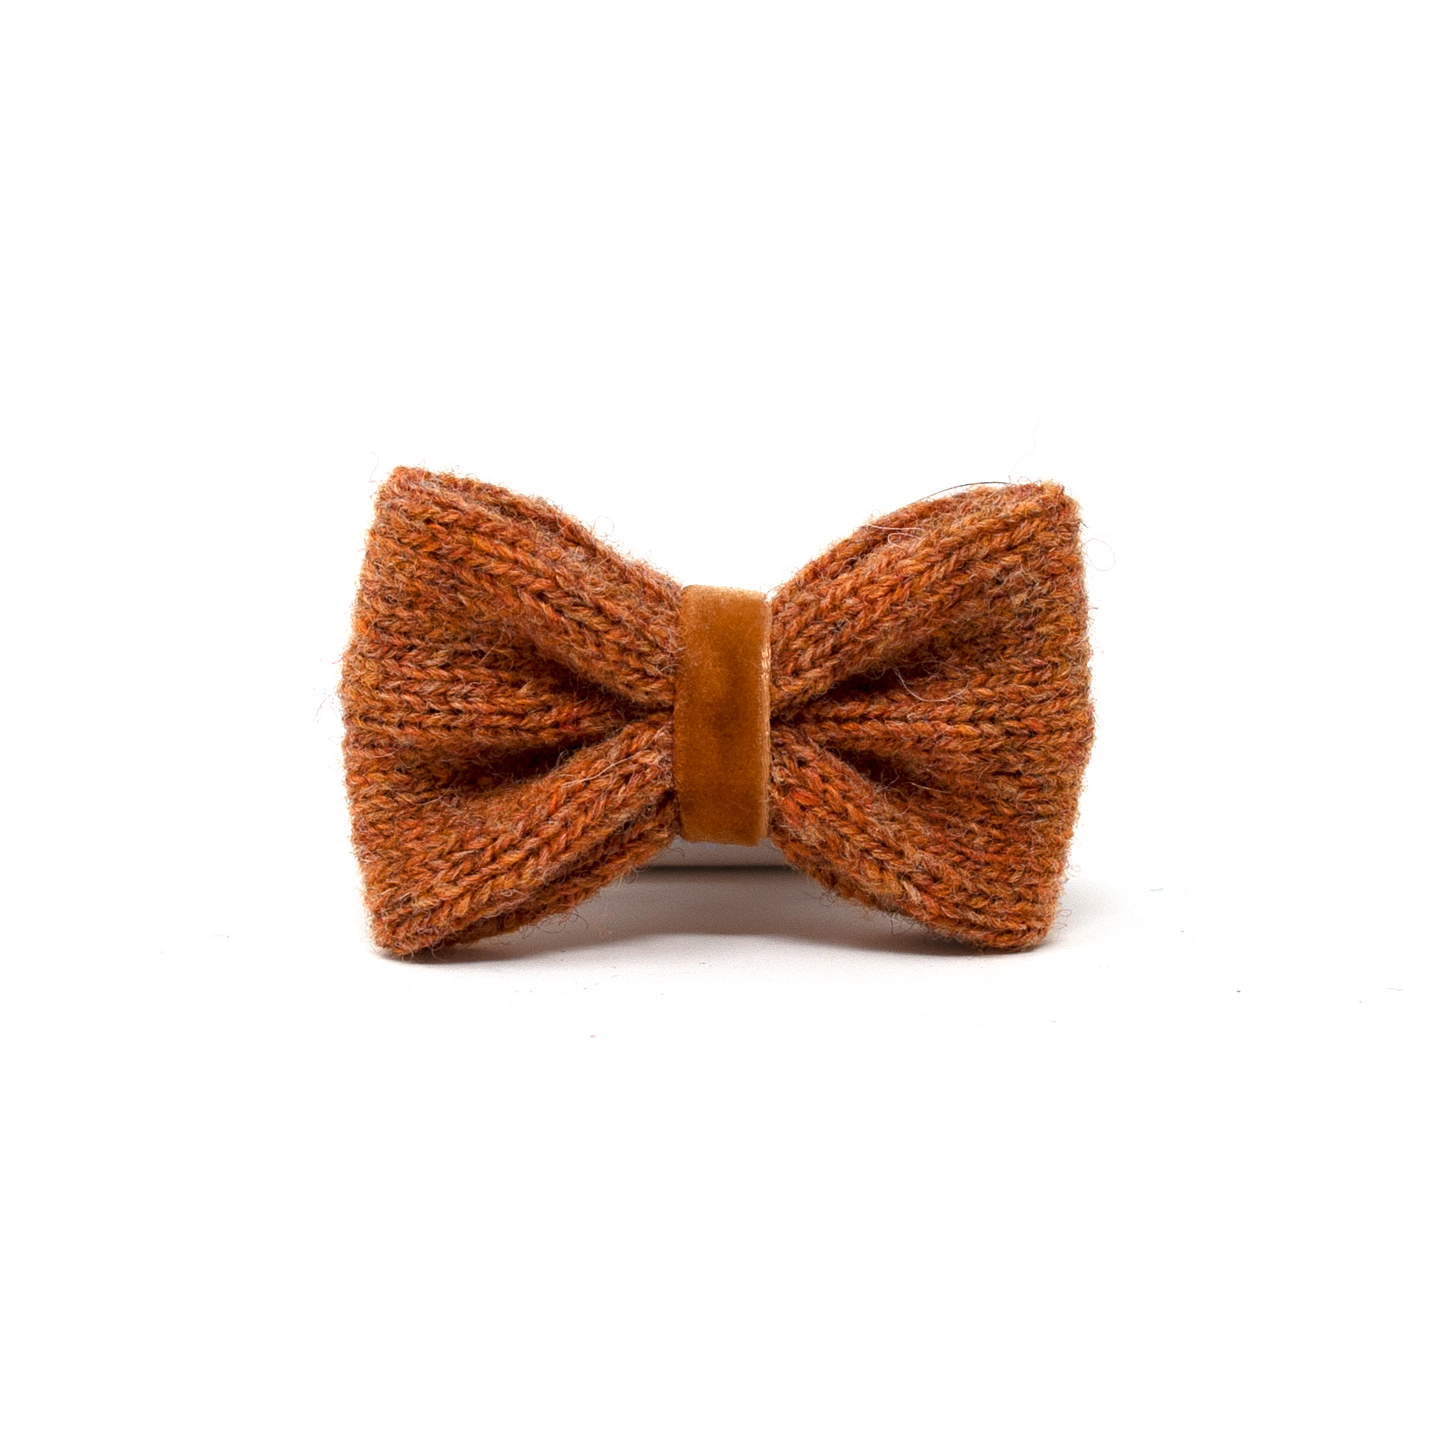 Copper - Autumn/Winter '23 Collection - Luxury Dog Bow Tie